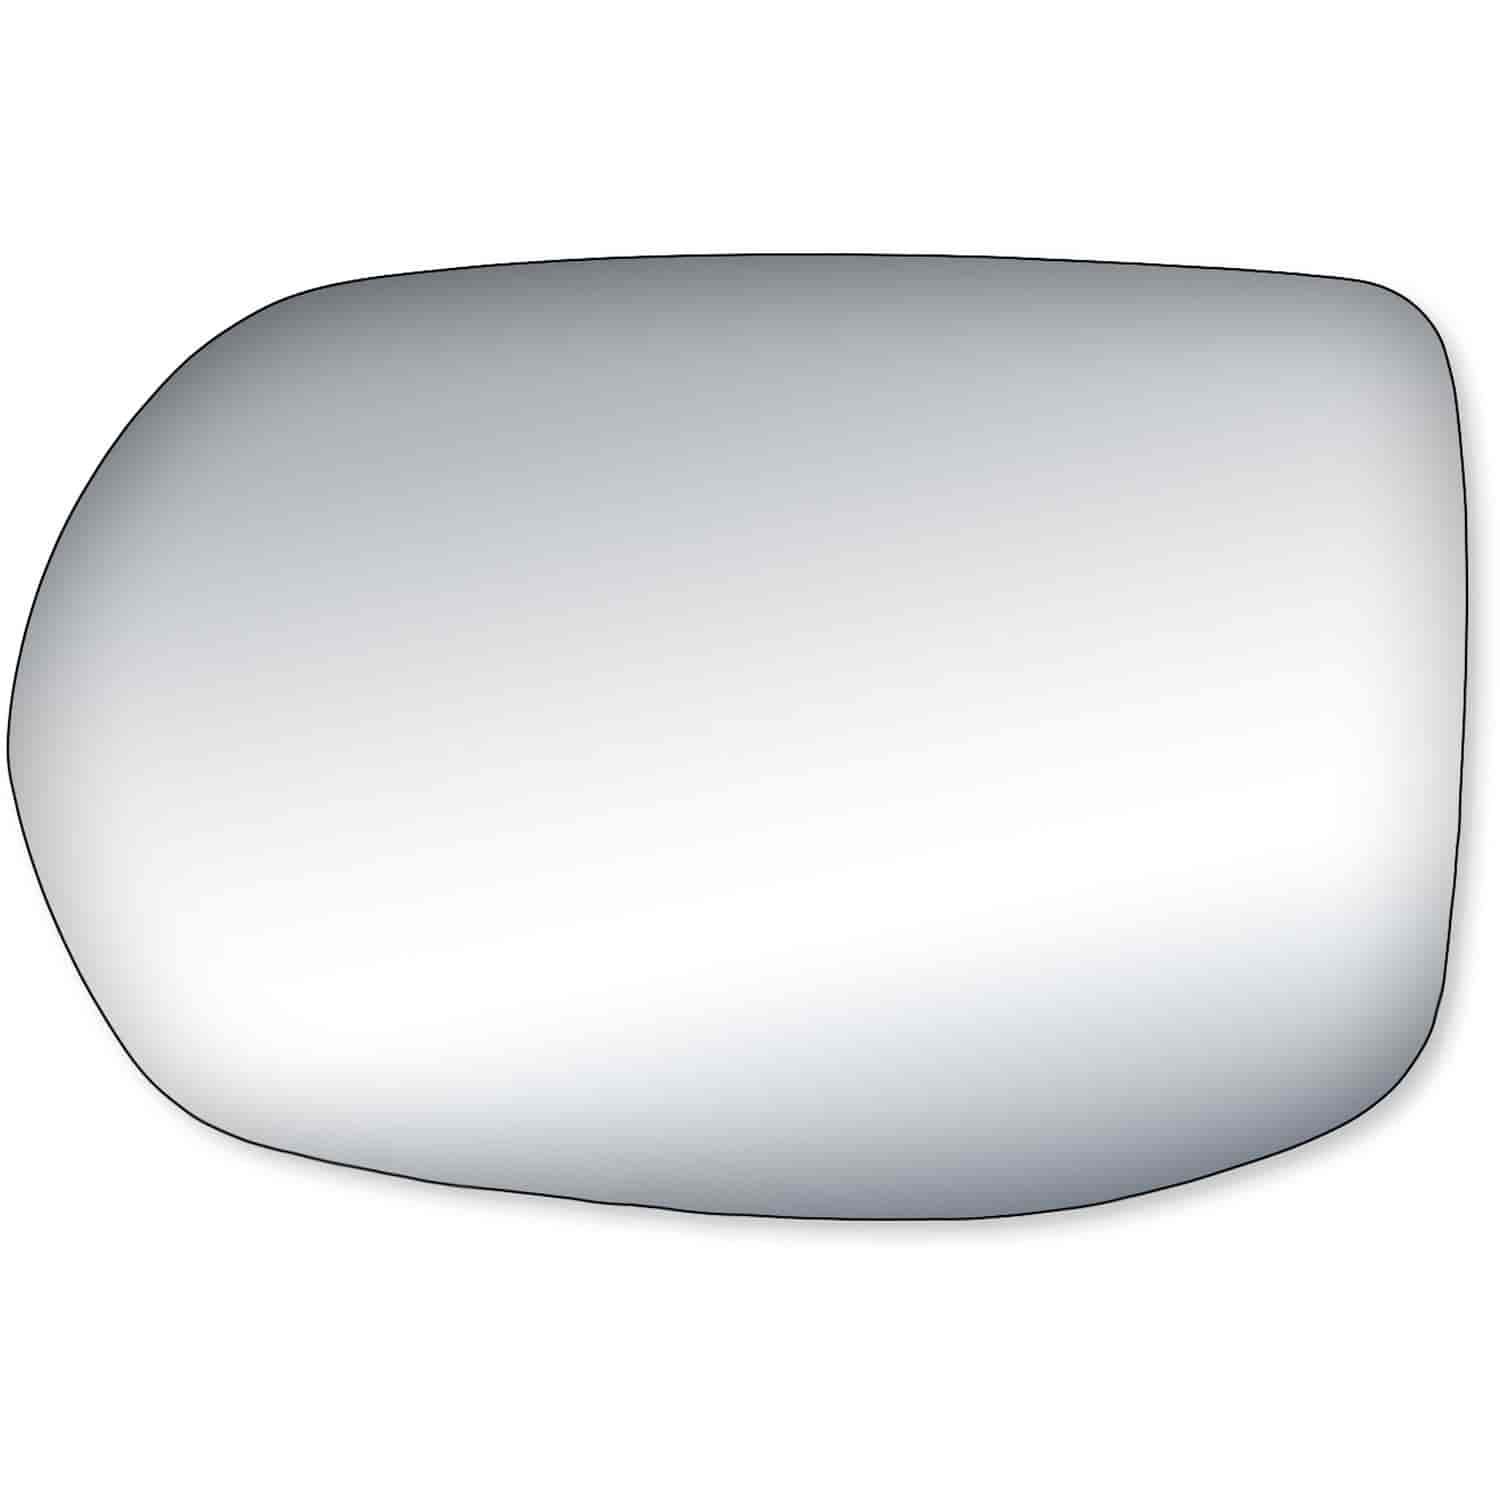 Replacement Glass for 12-14 CR-V EX/ EX-L/ LX